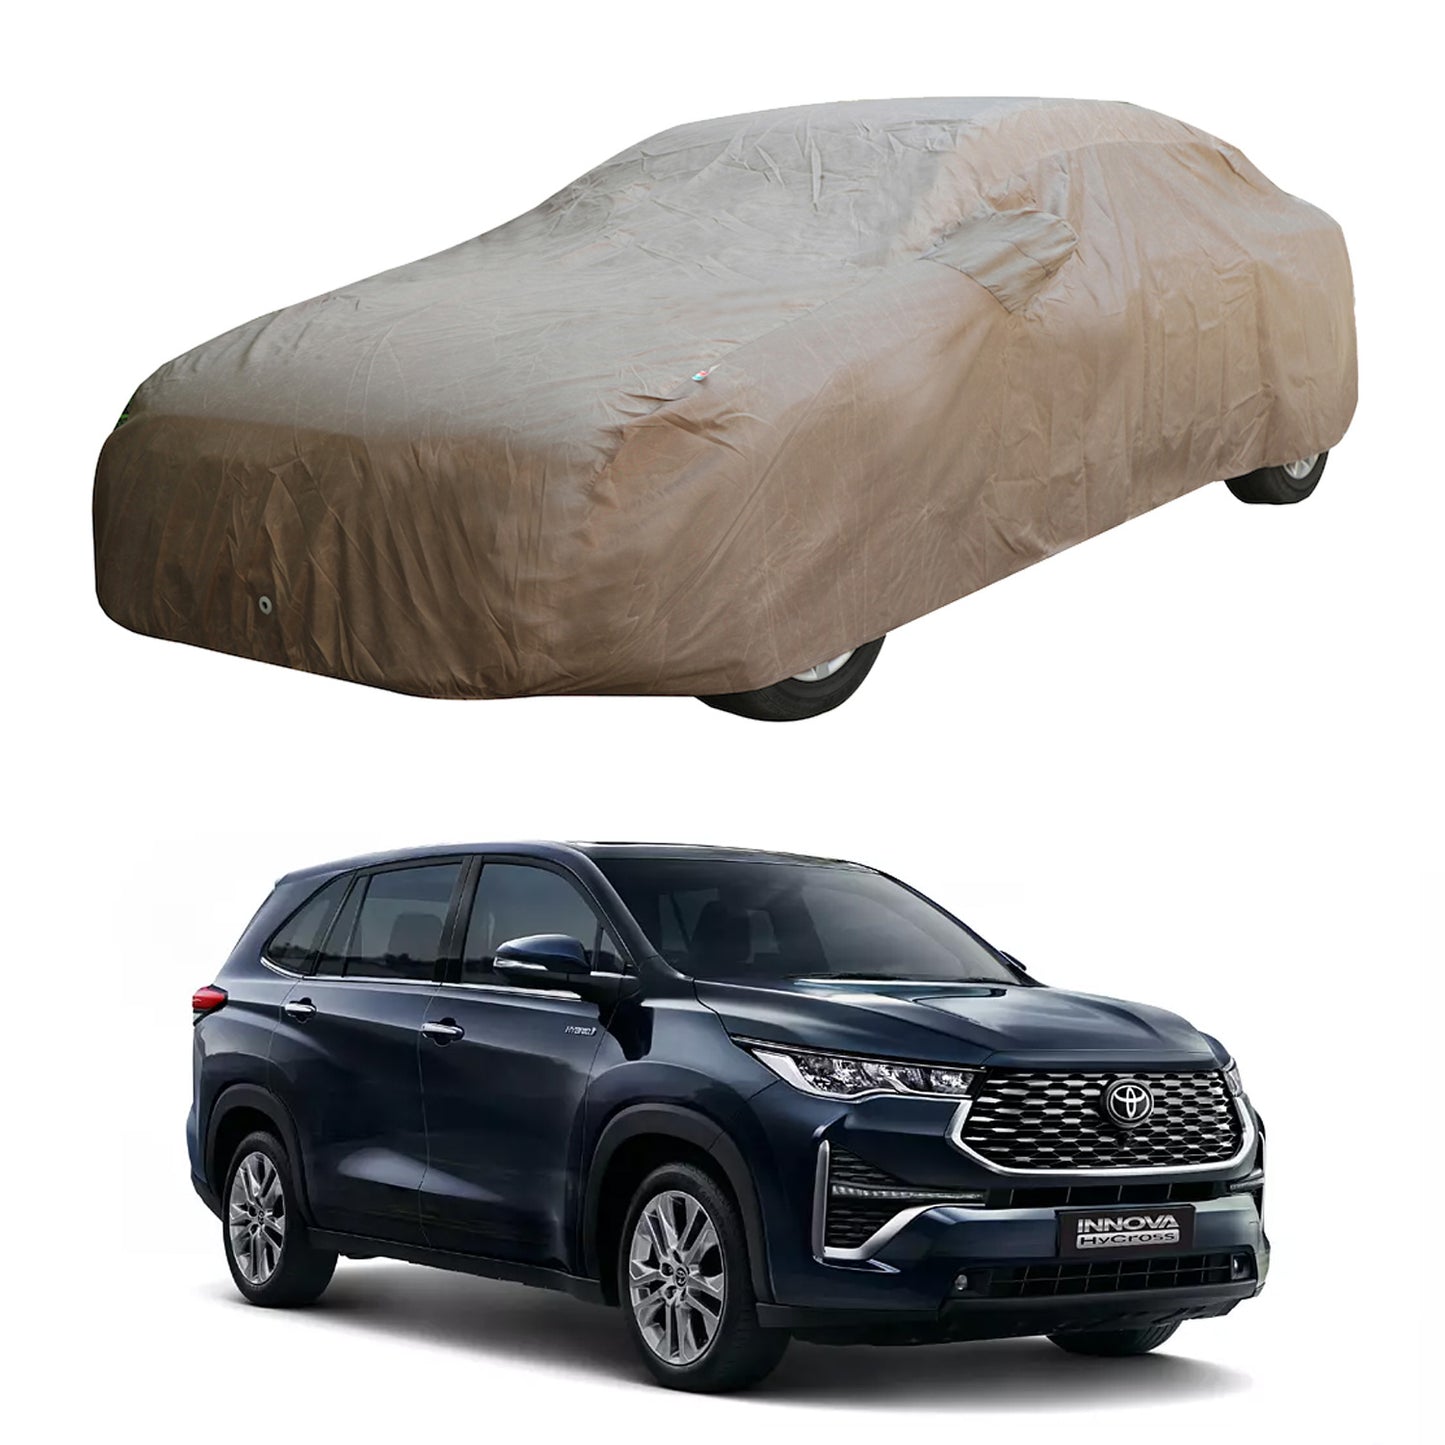 Oshotto 100% Waterproof Car Body Cover with Mirror Pockets For Toyota Innova Hycross (Brown)